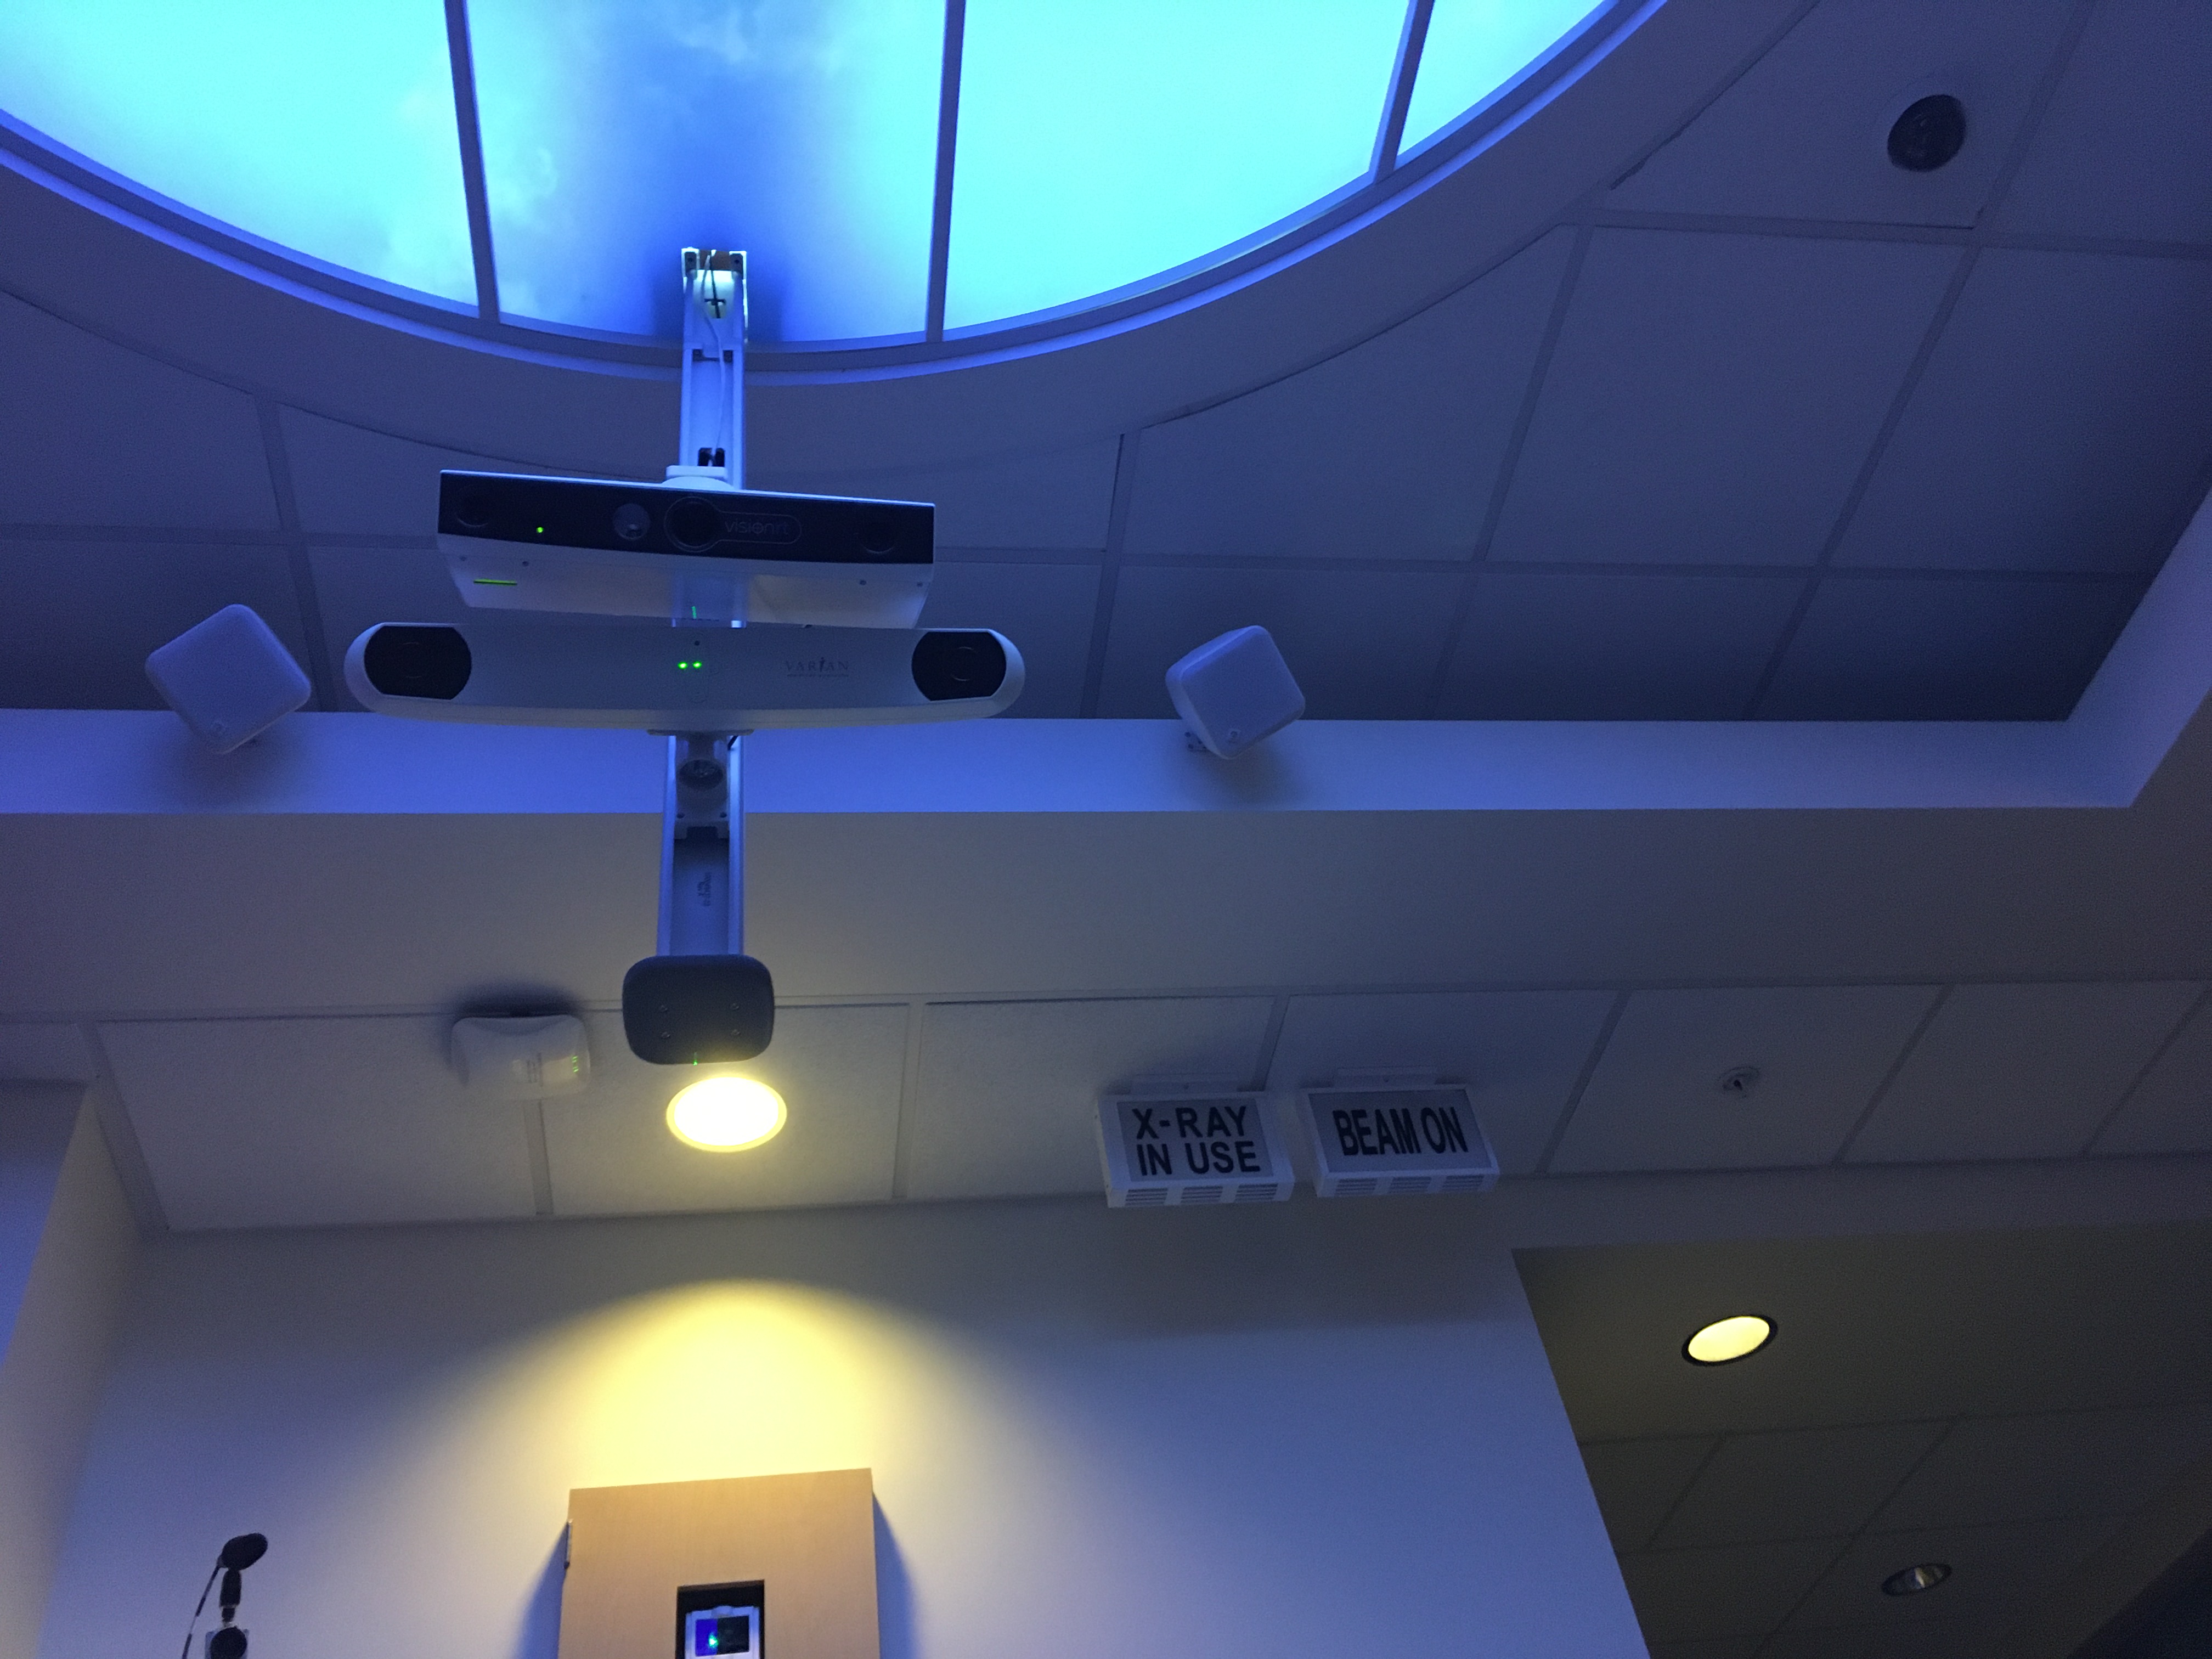 Photo of the ceiling and upper wall of a room, with a sky-colored light embedded in the ceiling, several cameras, lights, and/or lasers mounted to the ceiling, and two signs reading "X-Ray in Use" and "Beam On".